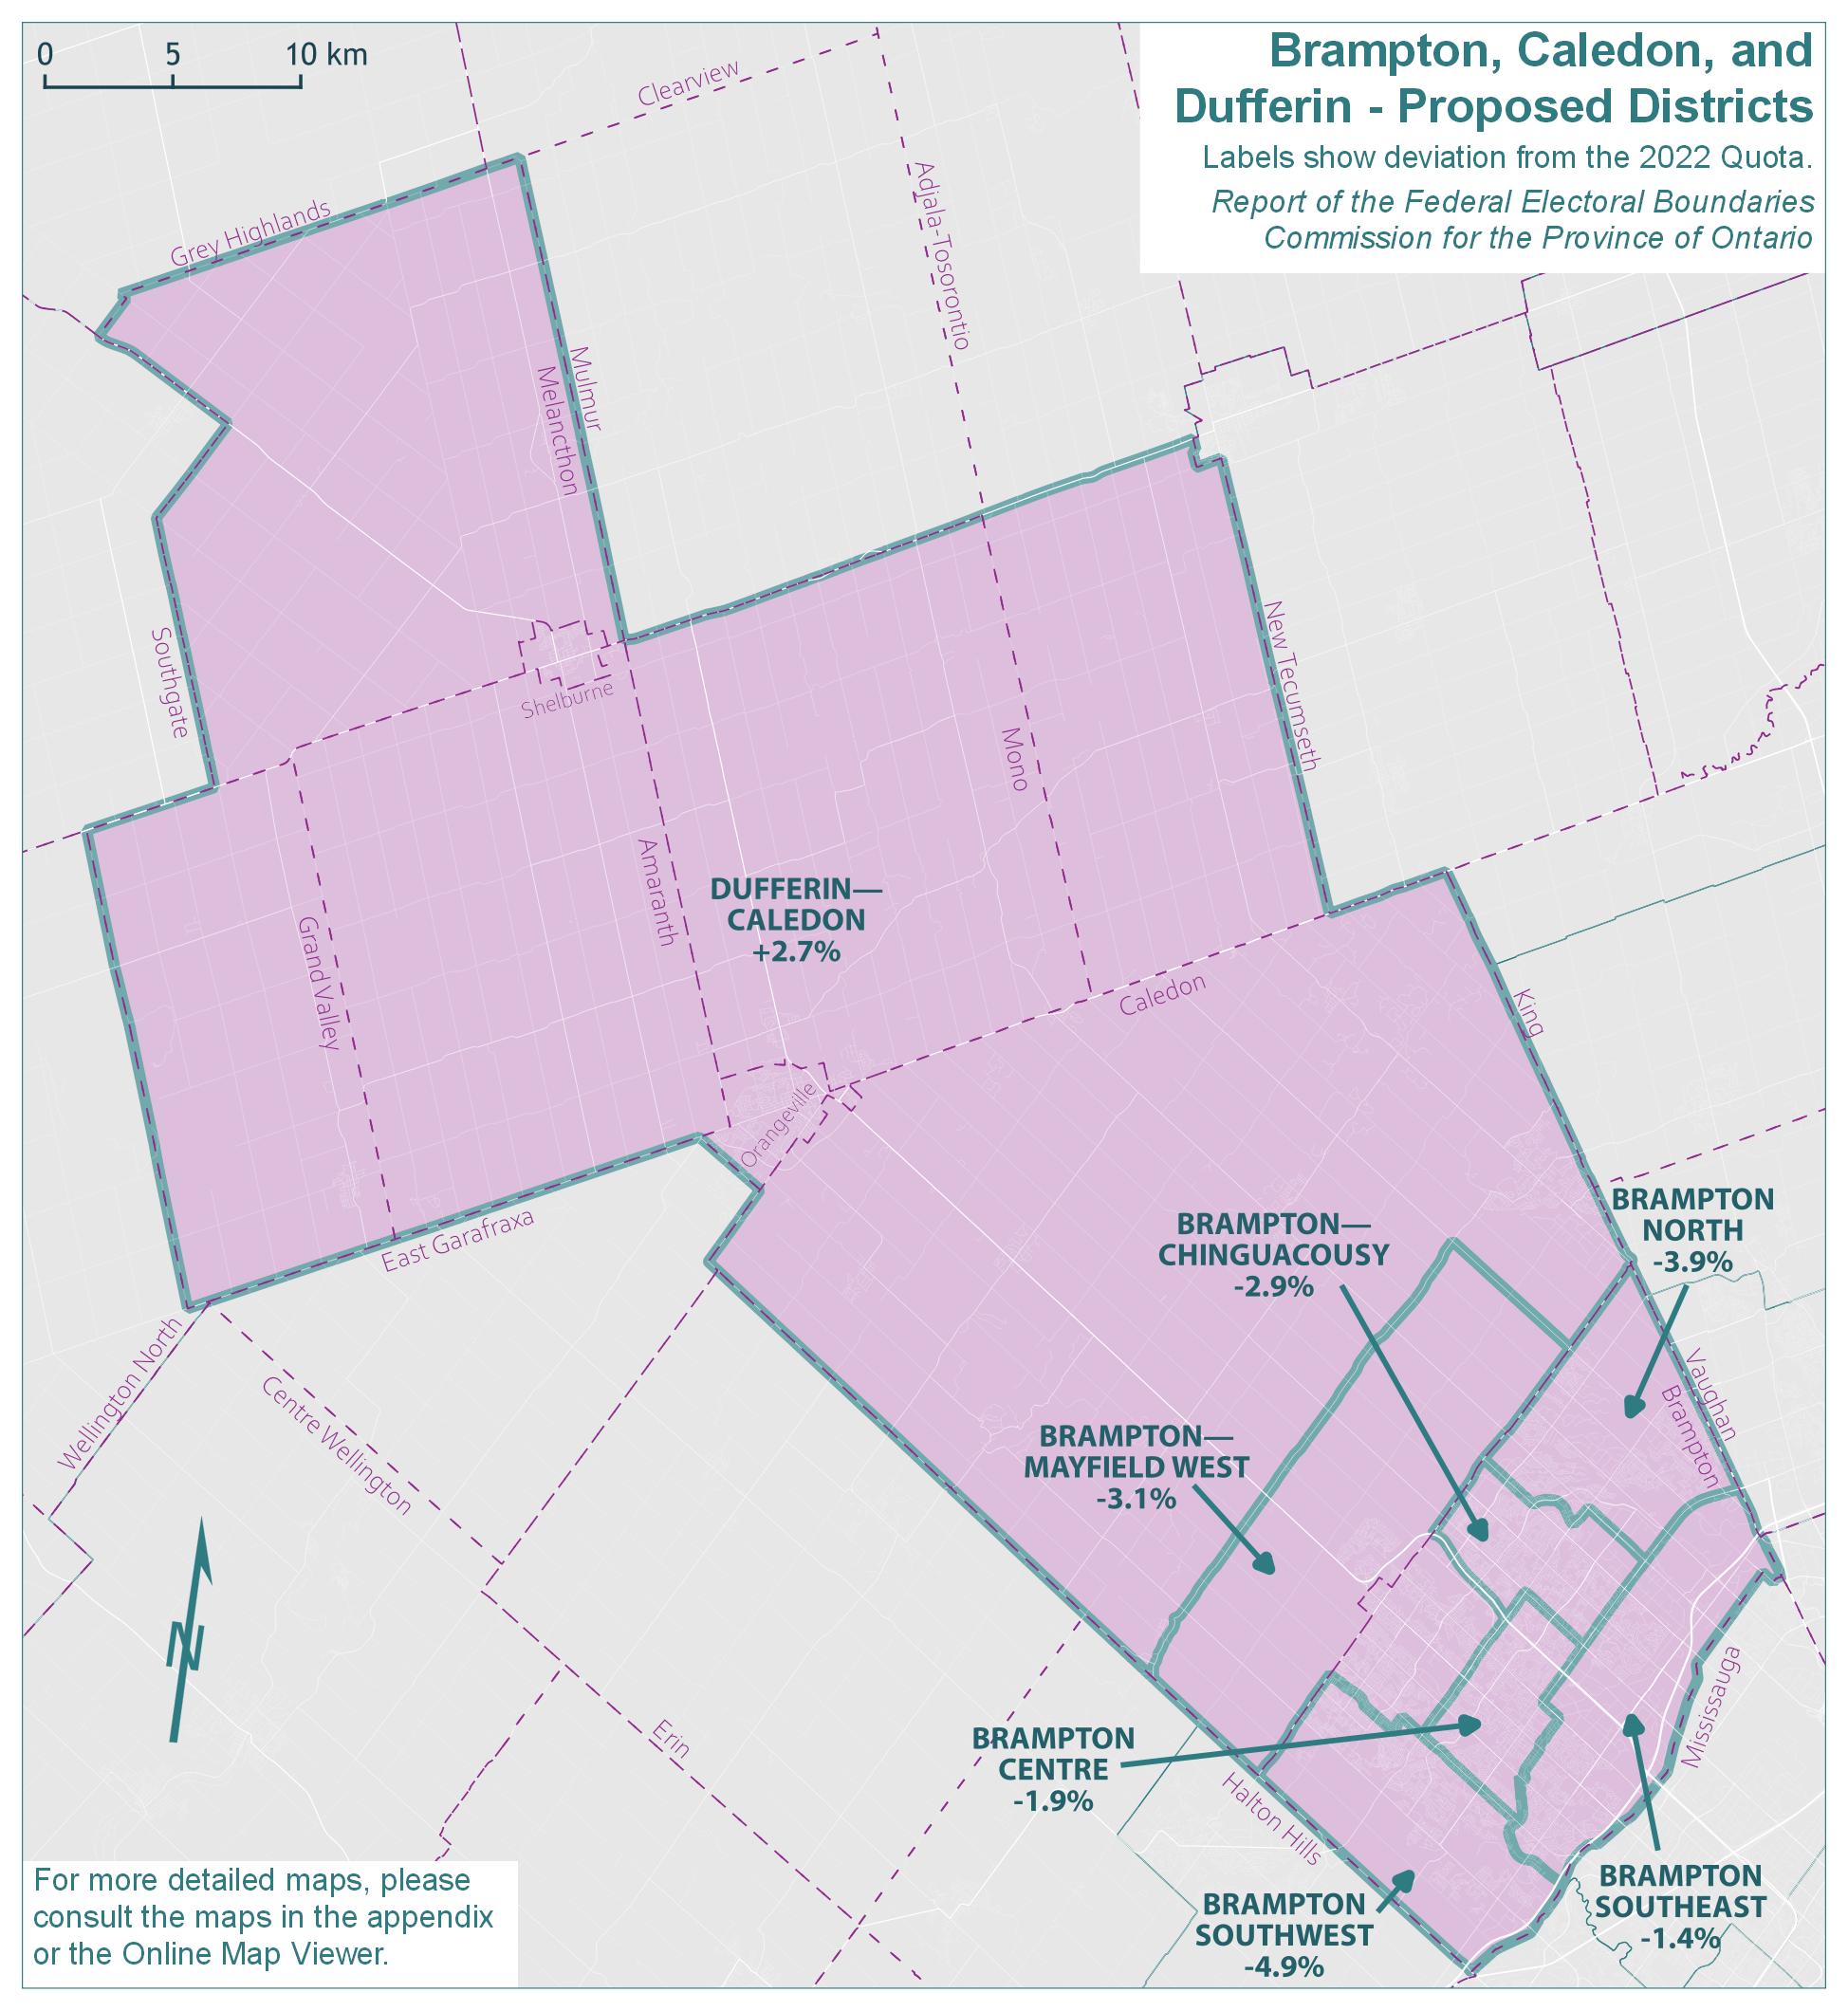 Brampton, Caledon, and Dufferin - Proposed Districts